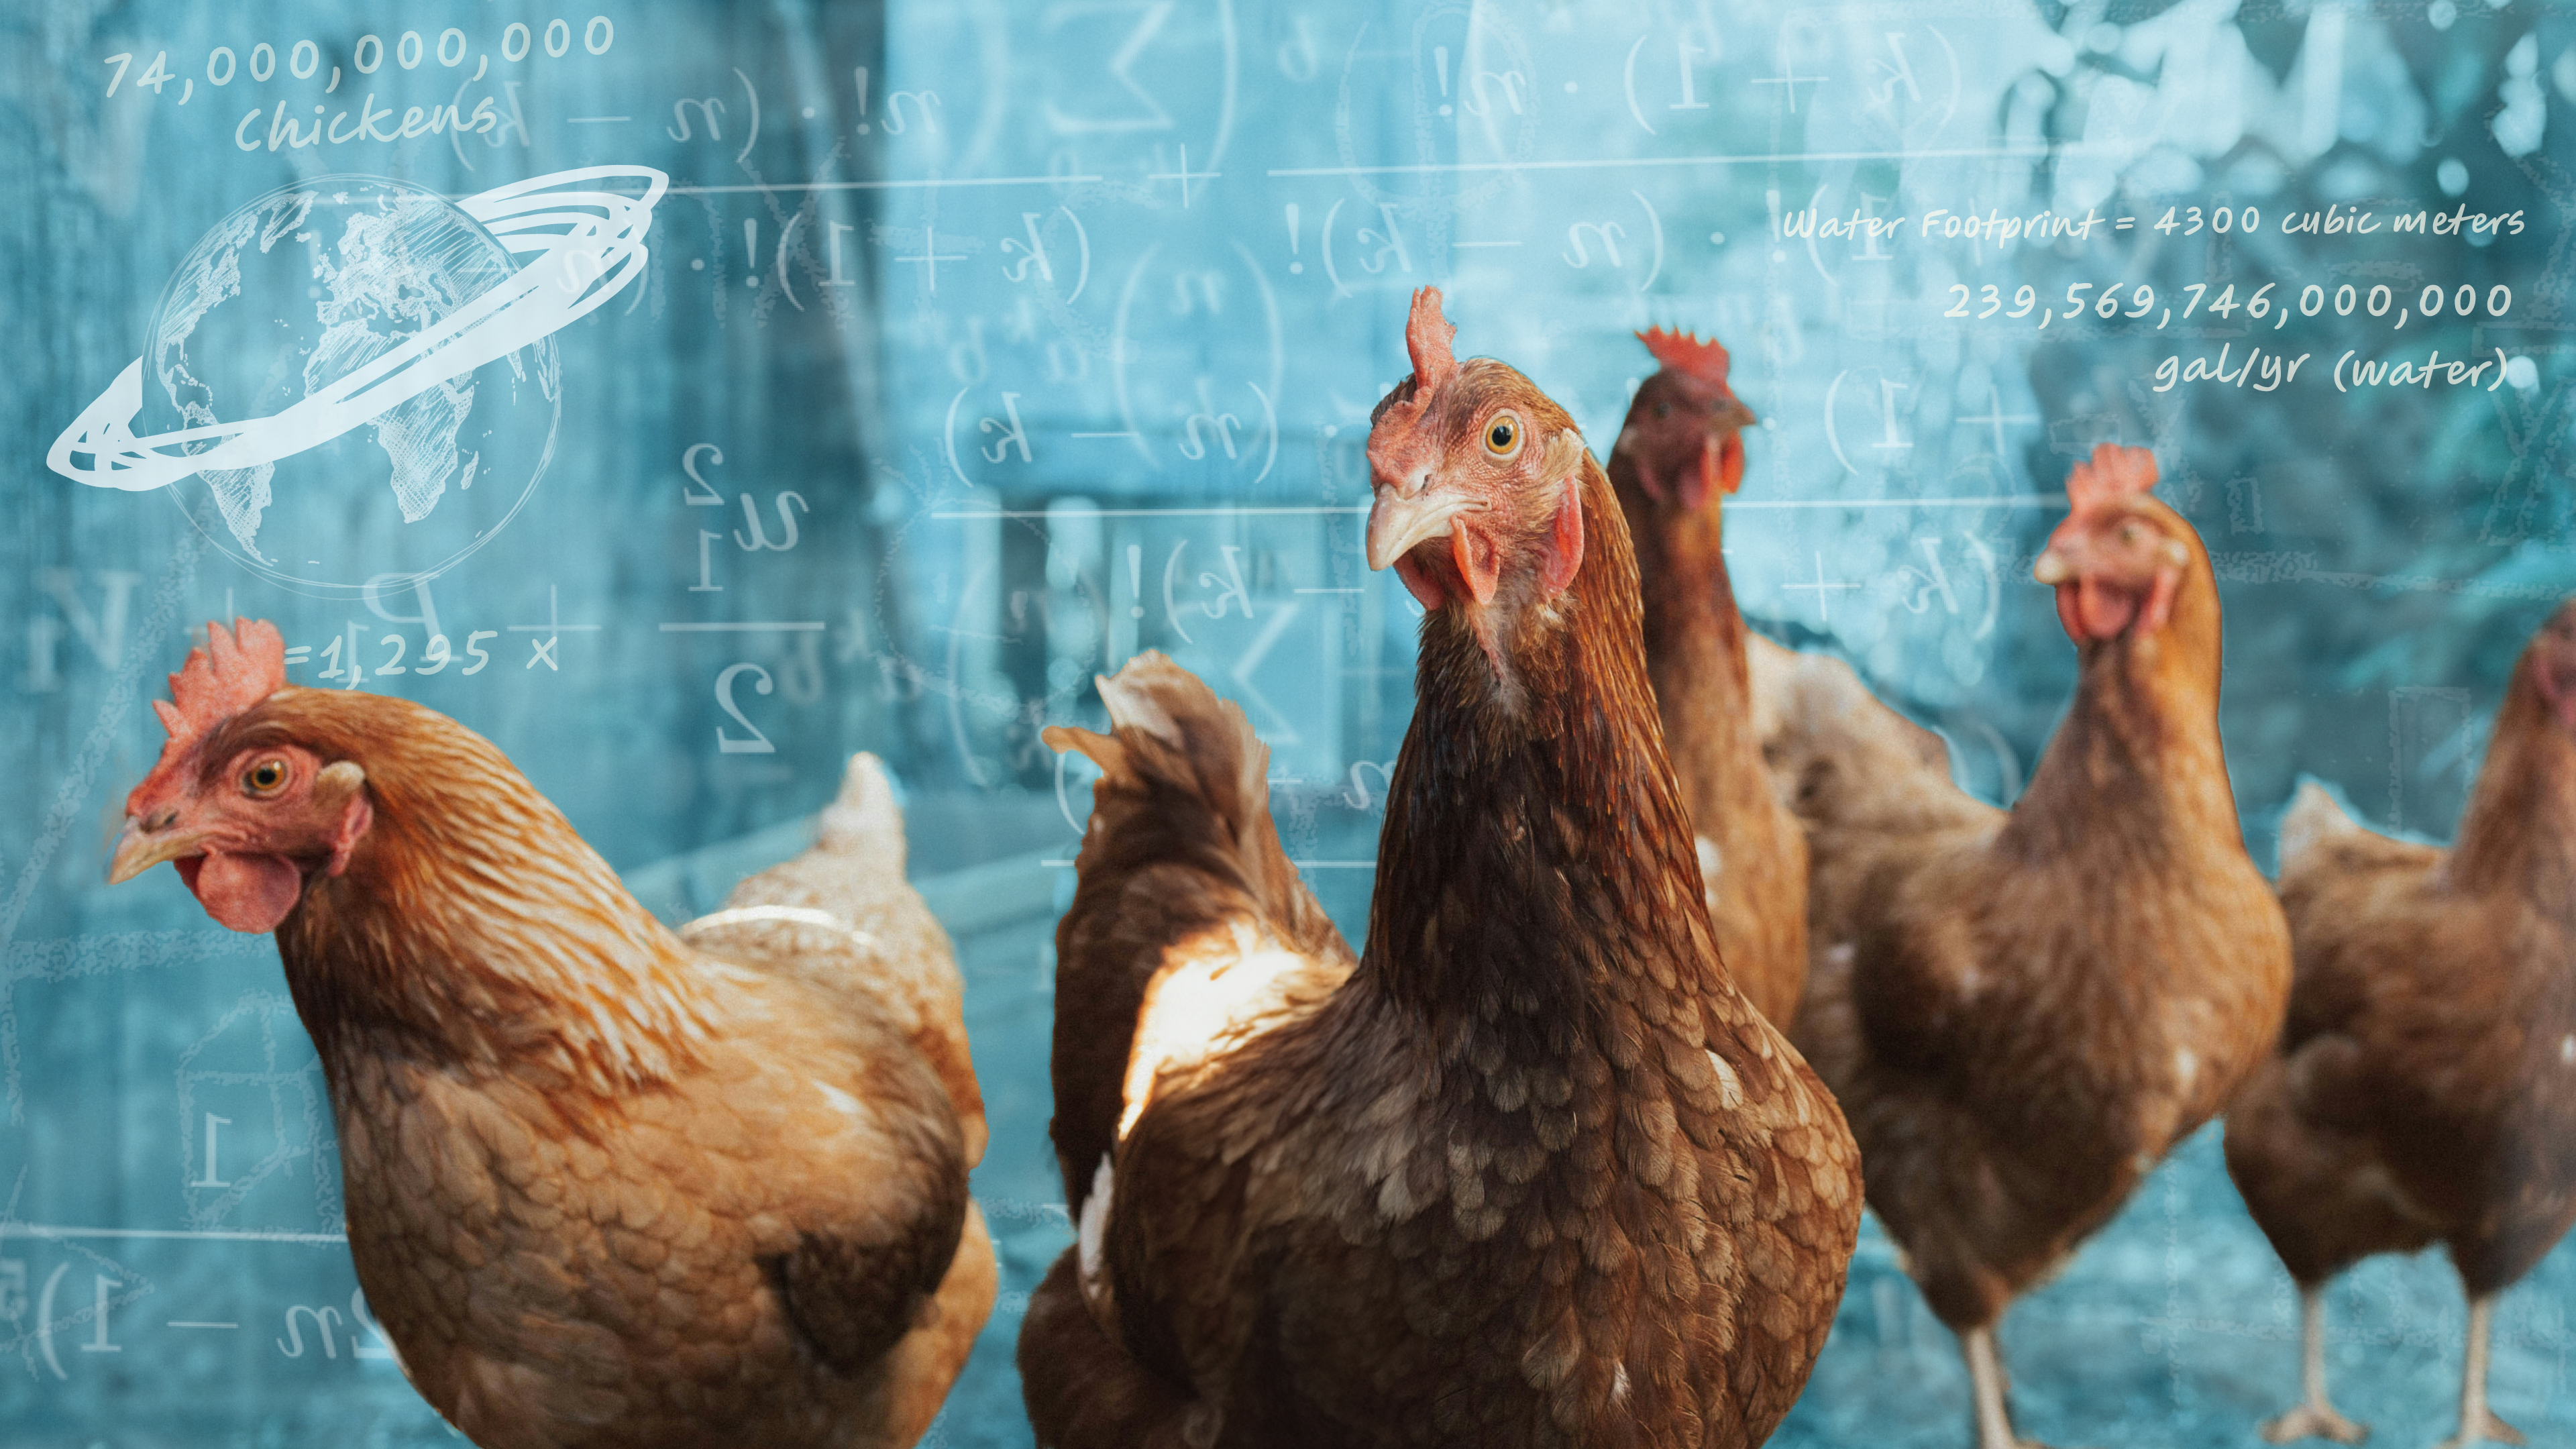 Chicken Math: The impact of conventional meat production